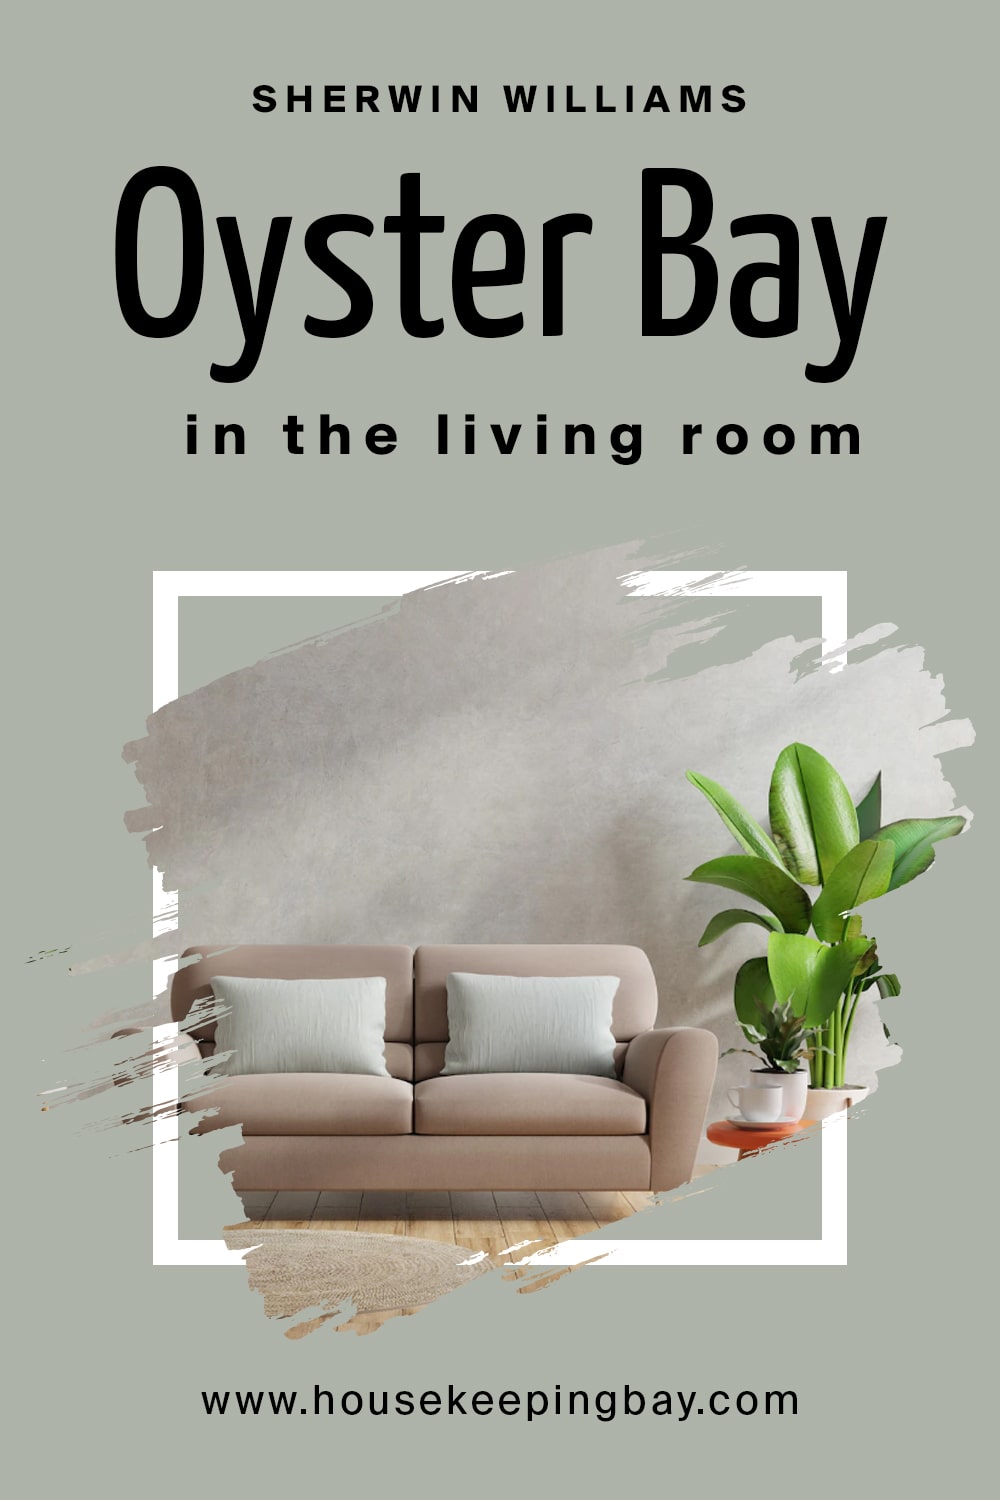 Sherwin Williams. Oyster Bay In the Living Room